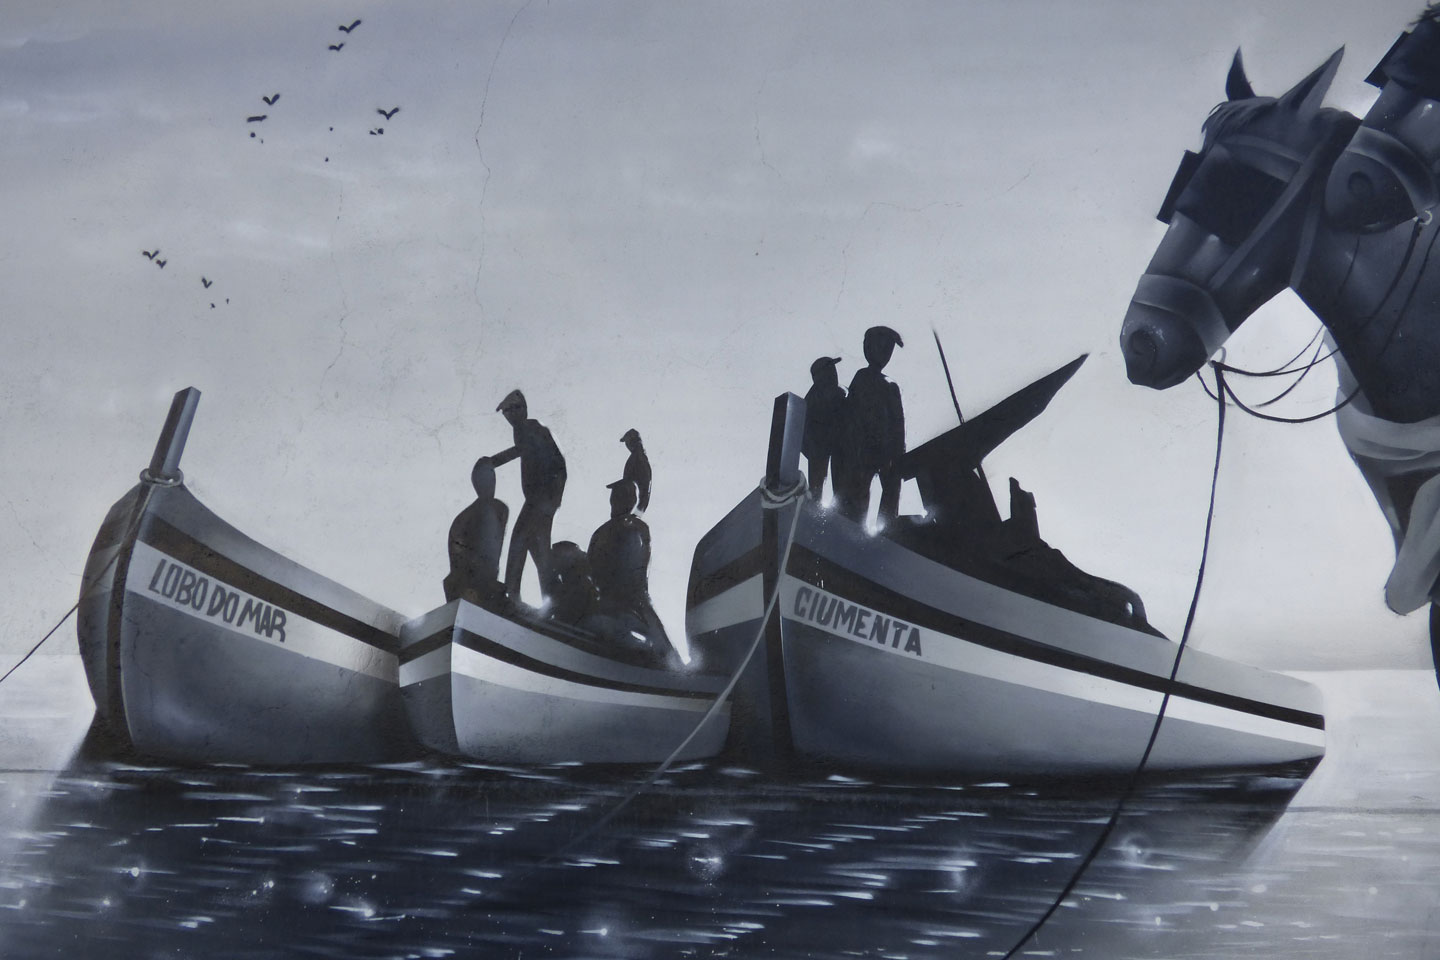 A photo of part of the Mural in Olhao, with fishing boats, fishermen and two horses